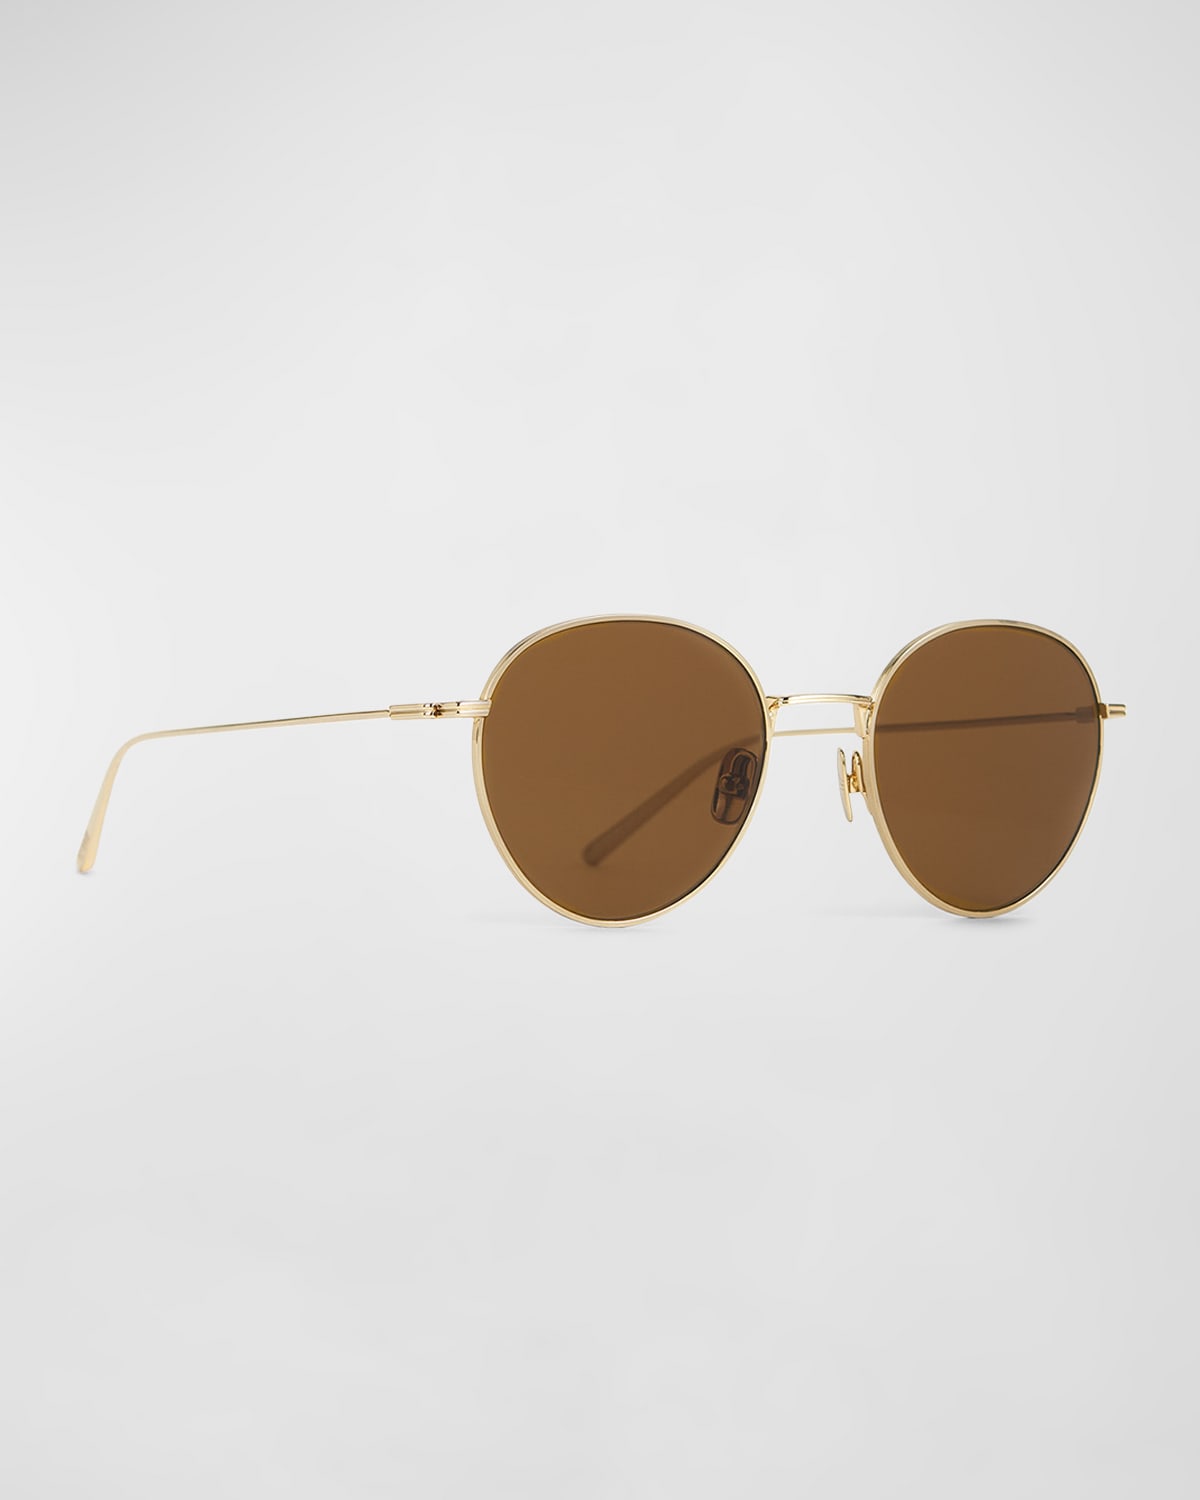 The Rounds Stainless Steel Round Sunglasses